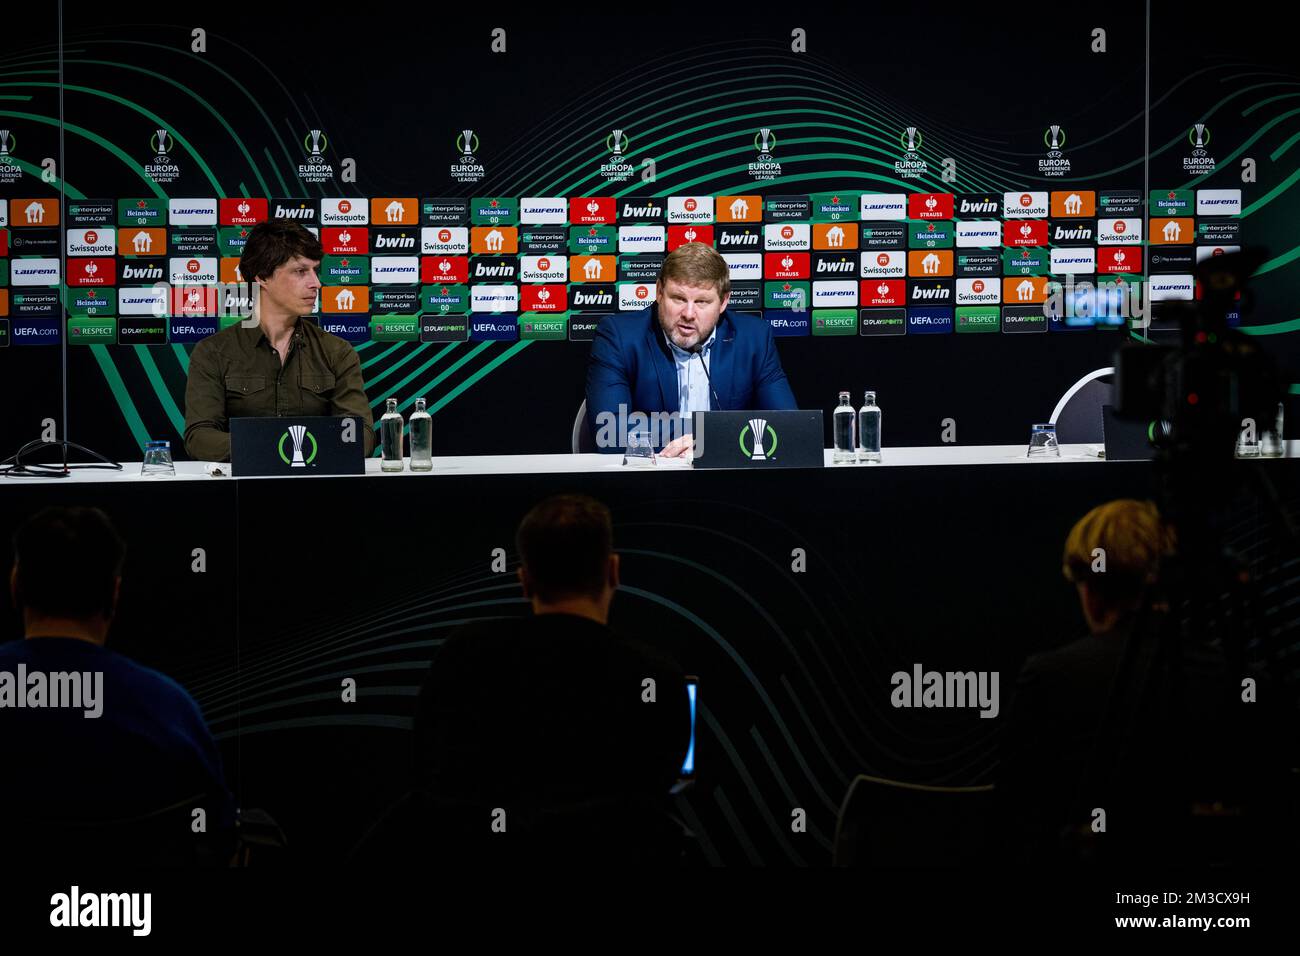 Gent's communications manager Tom Vandenbulcke and Gent's head coach Hein Vanhaezebrouck pictured during a press conference of Belgian soccer team KAA Gent, Wednesday 05 October 2022 in Gent, in preparation of tomorrow's game against Swedish team Djurgardens IF on day three of the Uefa Europa Conference League group stage. BELGA PHOTO JASPER JACOBS Stock Photo